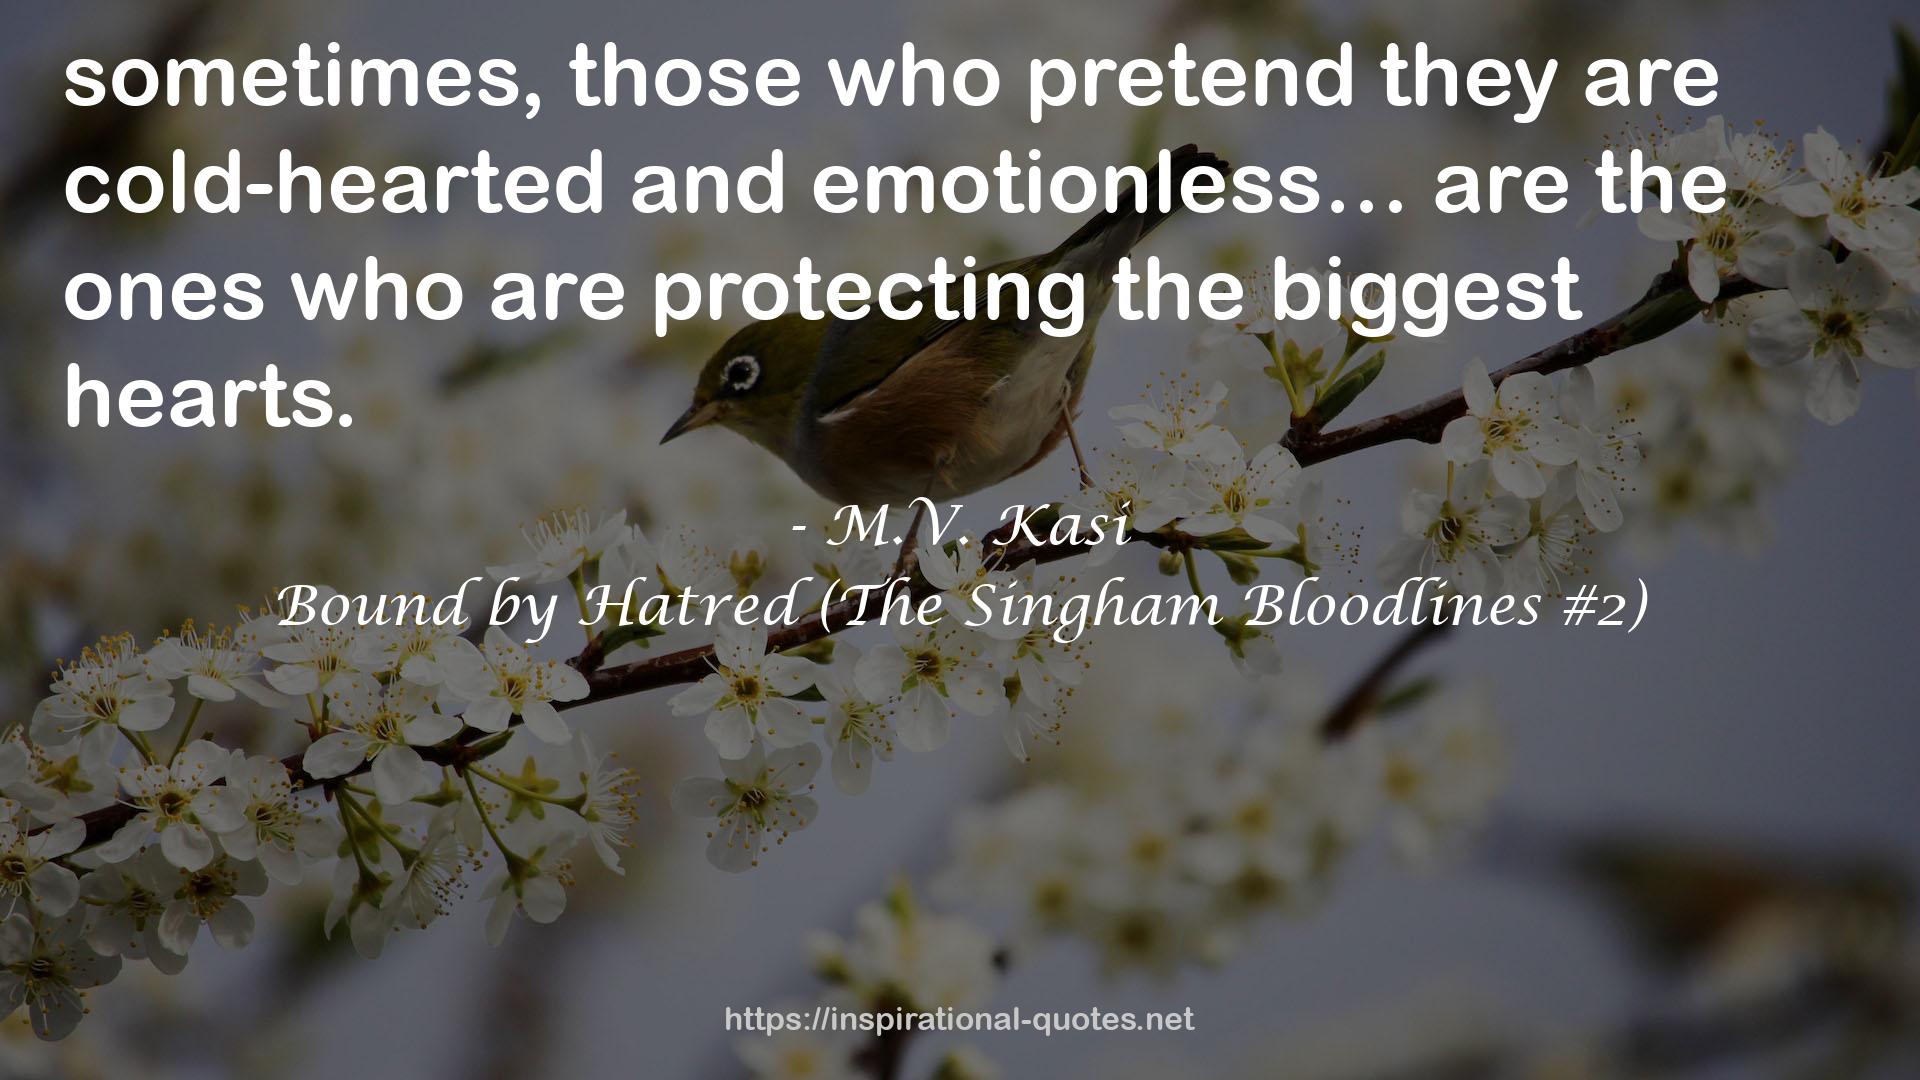 Bound by Hatred (The Singham Bloodlines #2) QUOTES